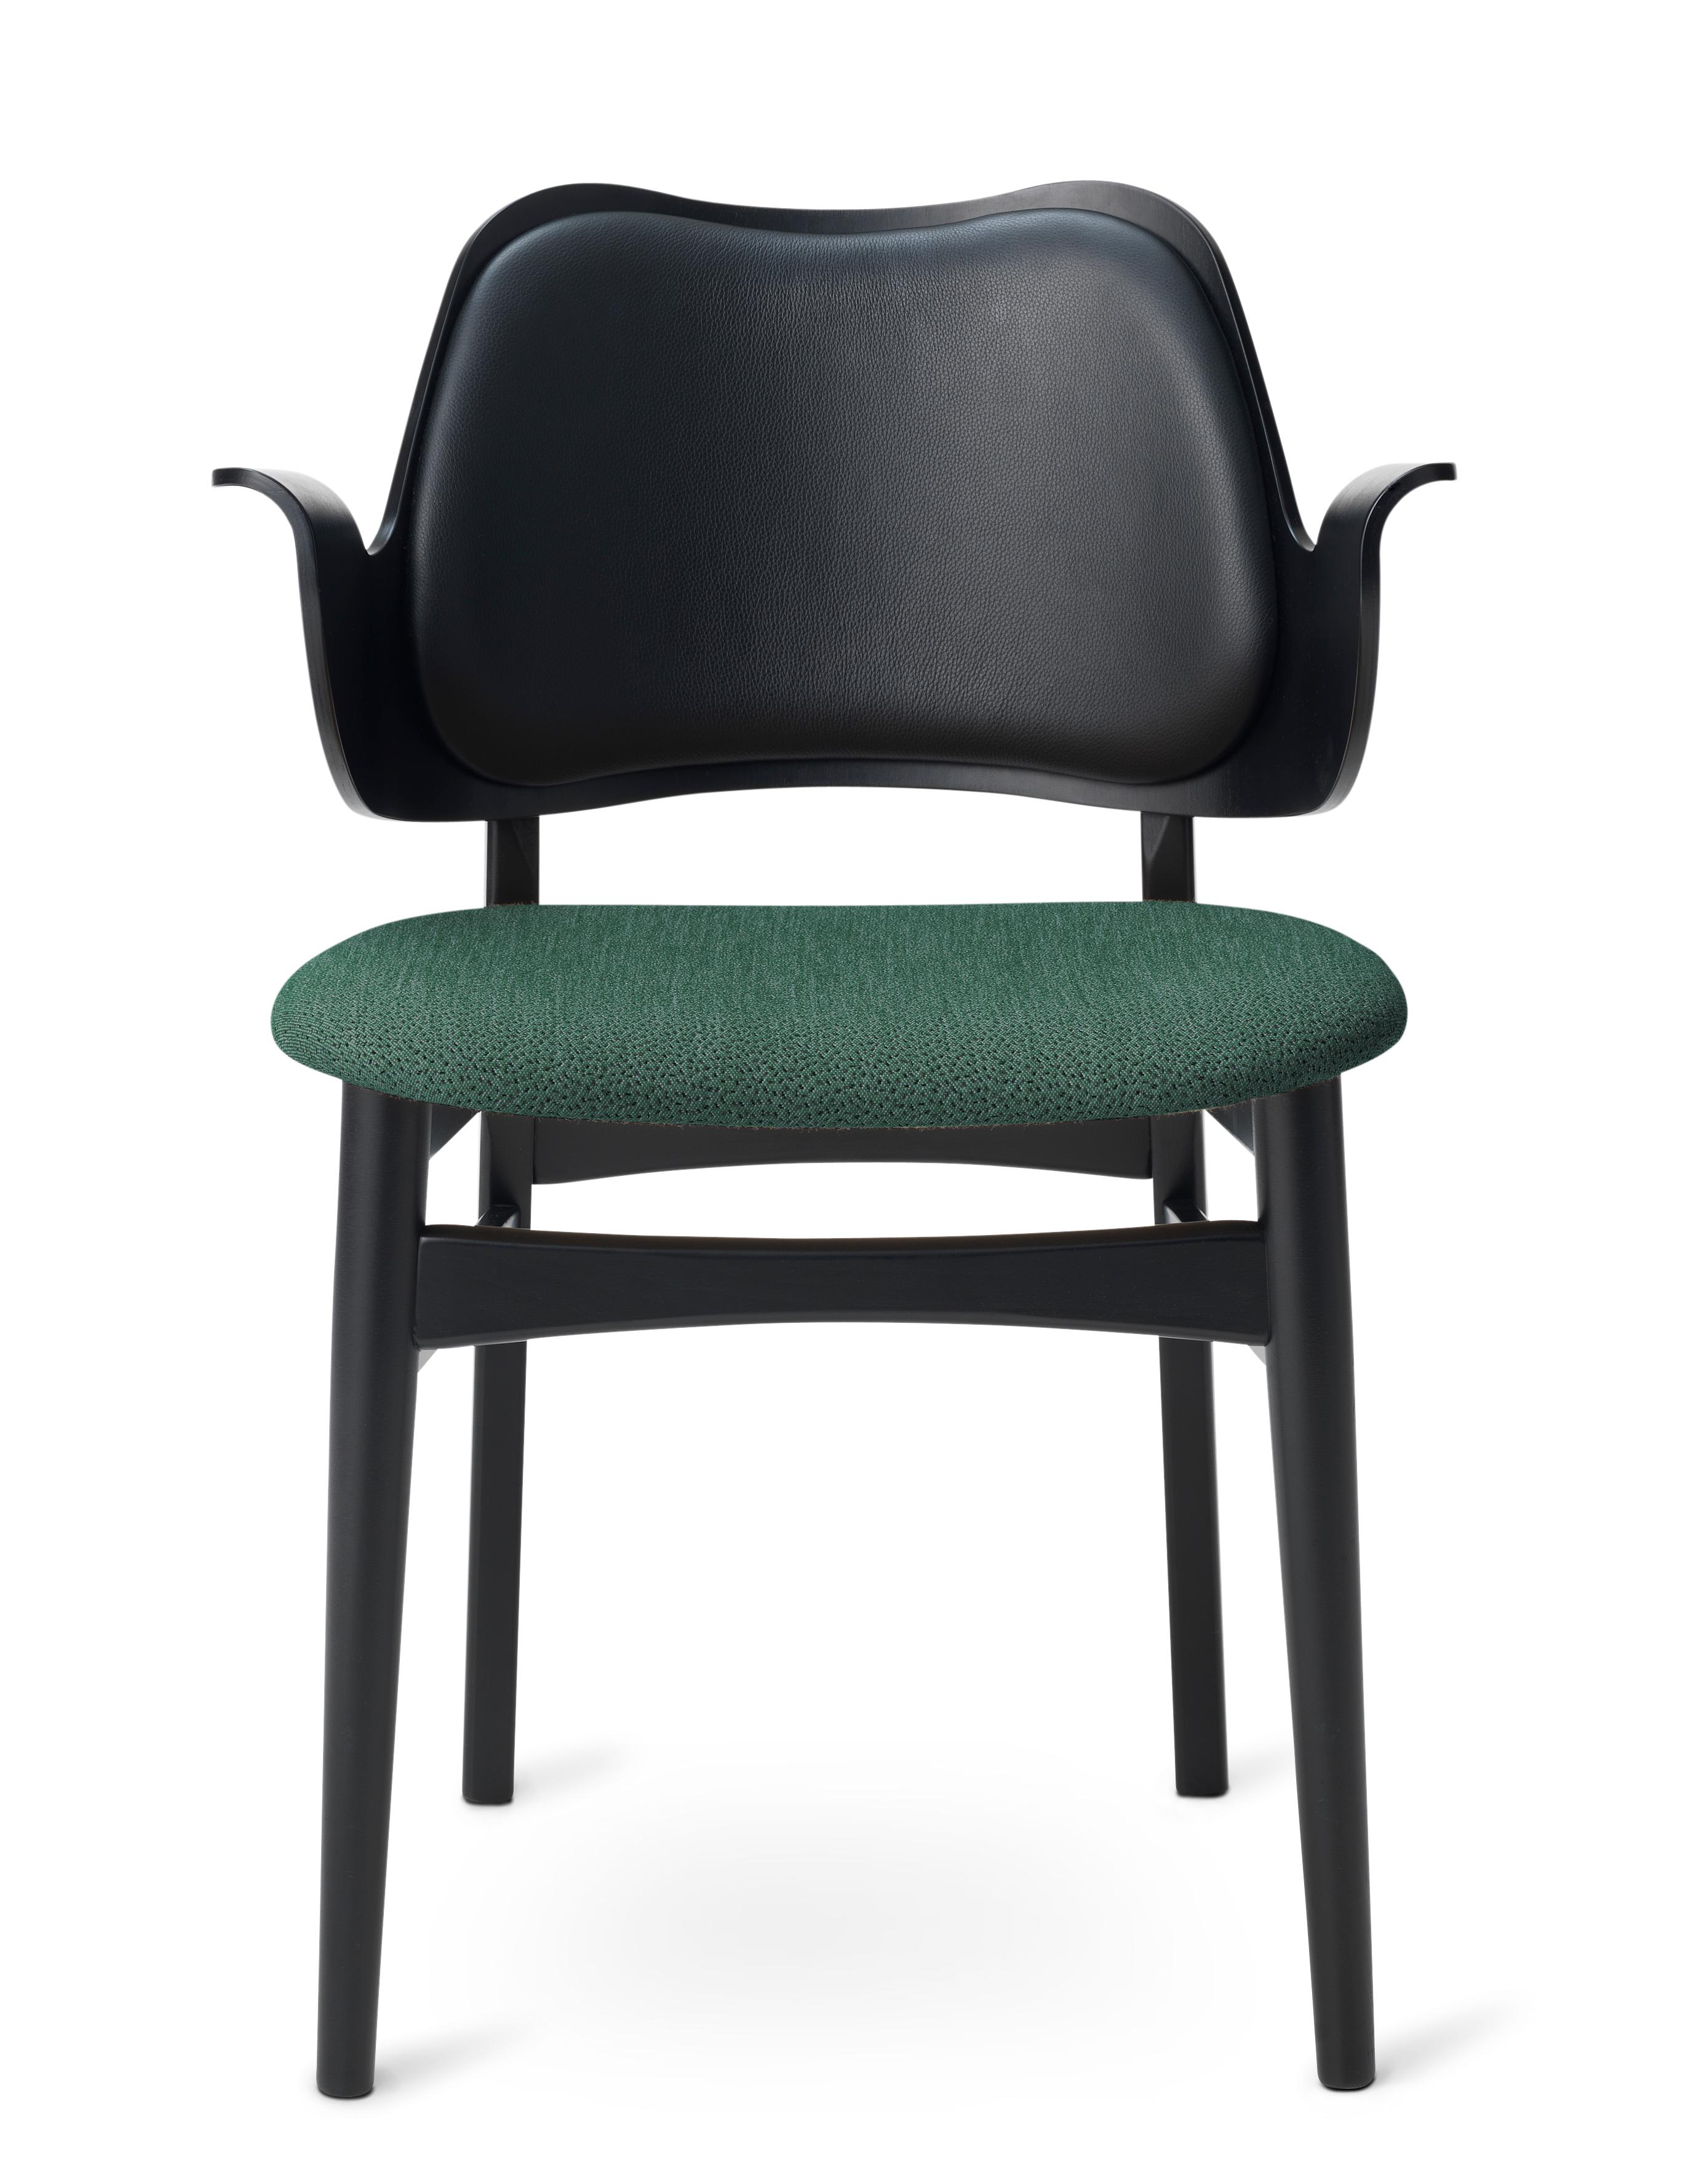 For Sale: Green (Black/Sprinkles 974) Gesture Two-Tone Fully Upholstered Chair in Black, by Hans Olsen for Warm Nordic